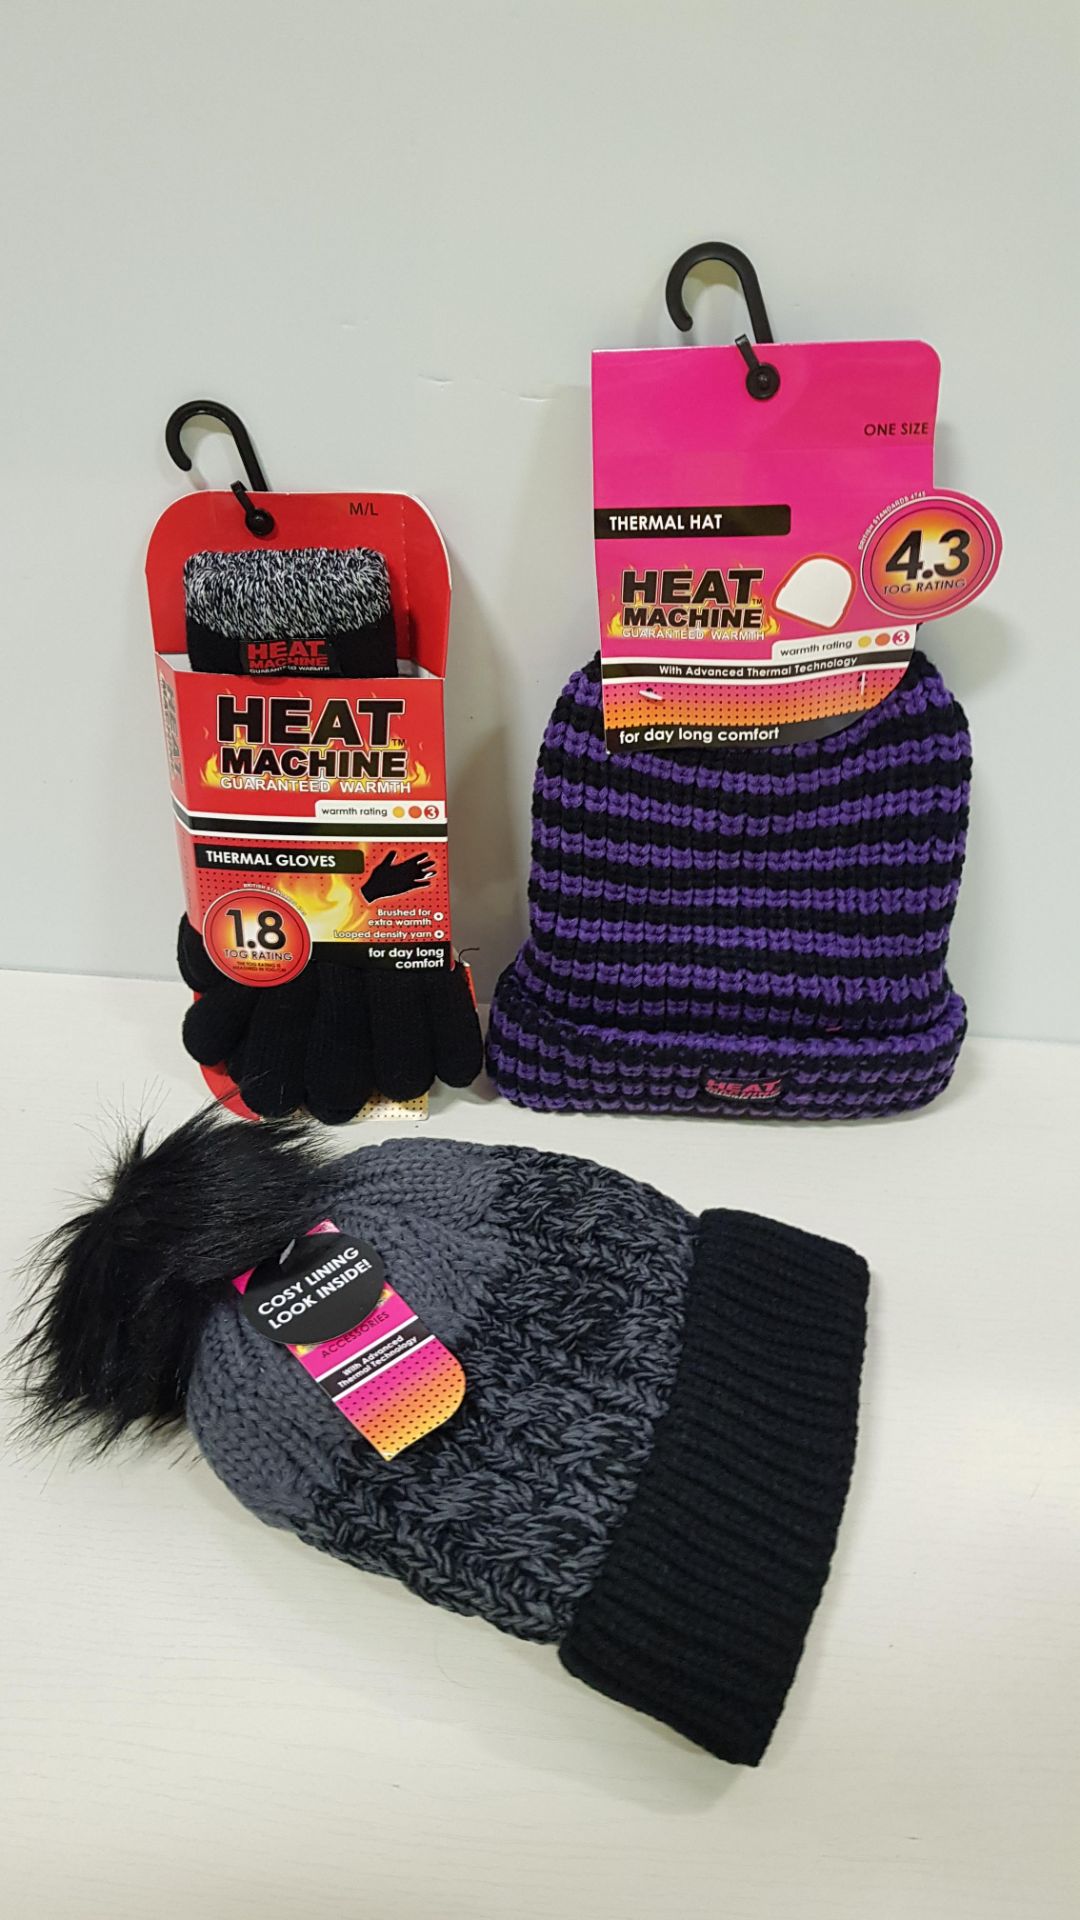 66 PIECE MIXED CLOTHING LOT CONTAINING THE HEAT MACHINE THERMAL HATS IN VARIOUS STYLES AND THERMAL